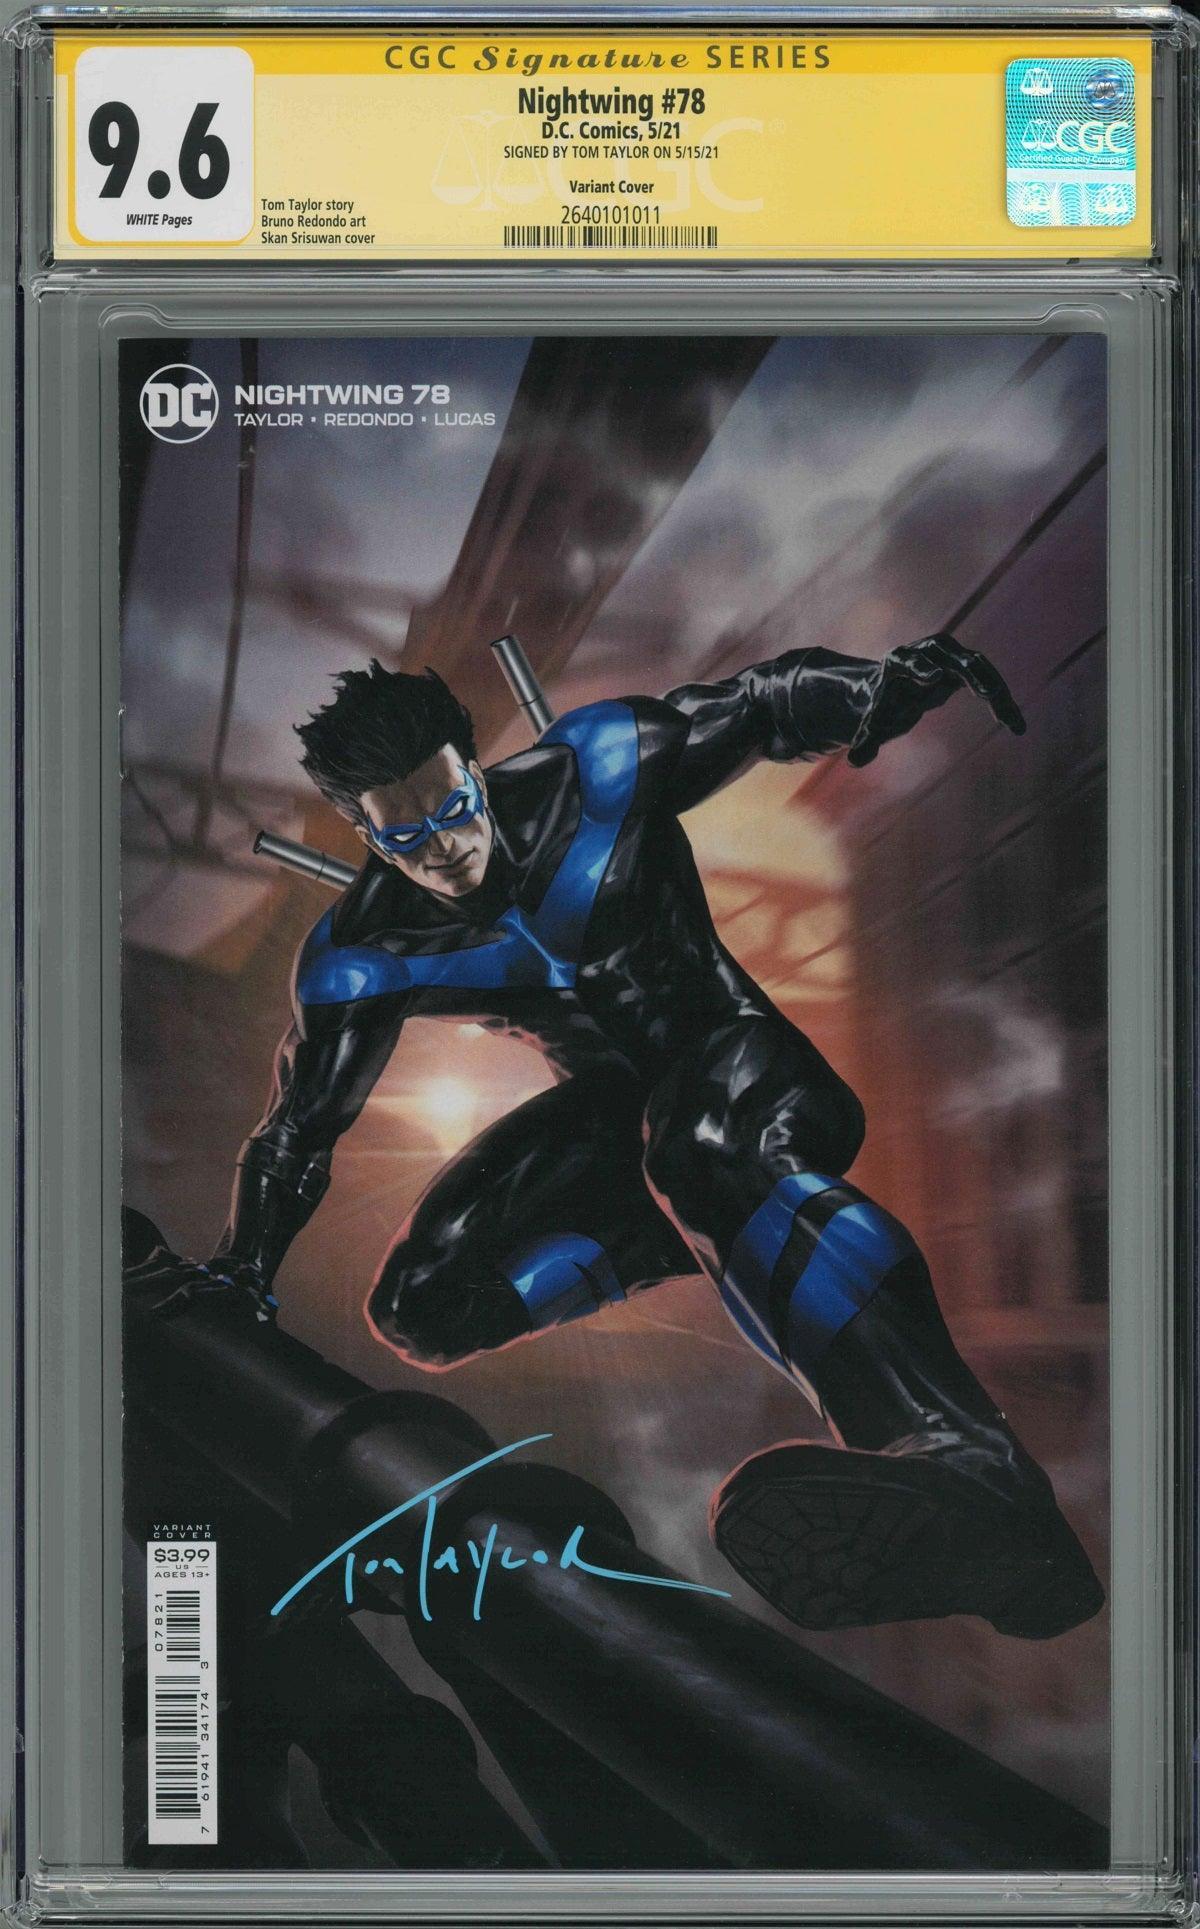 CGC NIGHTWING #78 VARIANT COVER (9.6) SIGNATURE SERIES - SIGNED BY TOM TAYLOR - Kings Comics